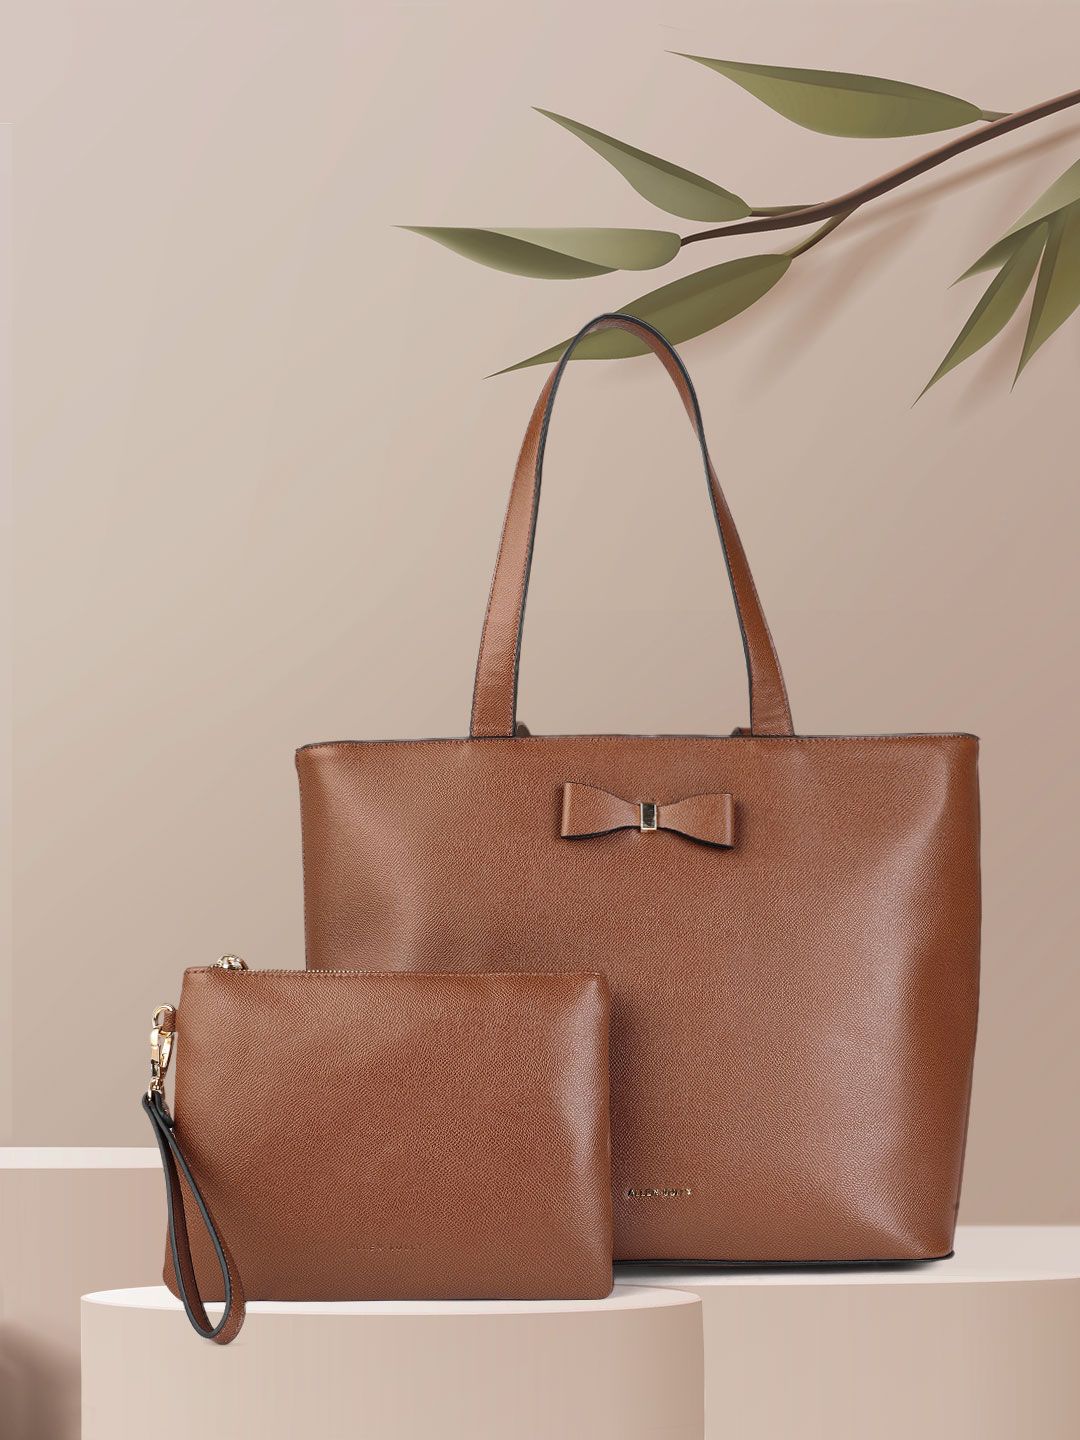 Allen Solly Camel Brown Solid Oversized Structured Shoulder Bag with Bow Detail Price in India